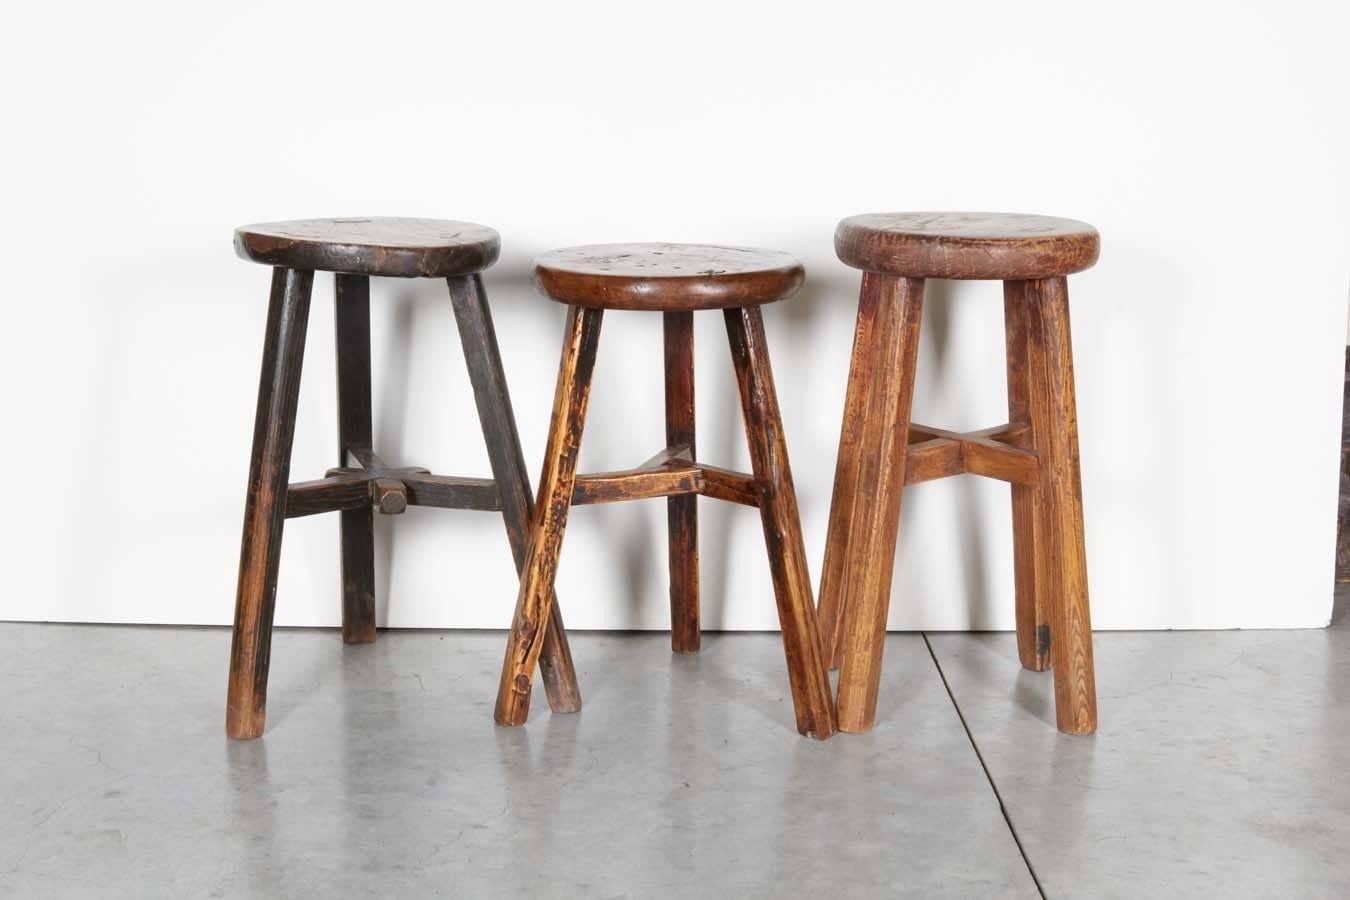 Three antique Chinese elm stools, each with a beautiful patina. Two with three legs and one with four legs. Classic pieces. Sold individually. From Shandong Province ,circa 1900.
2 pieces available, the two in foreground on main image, and image #5